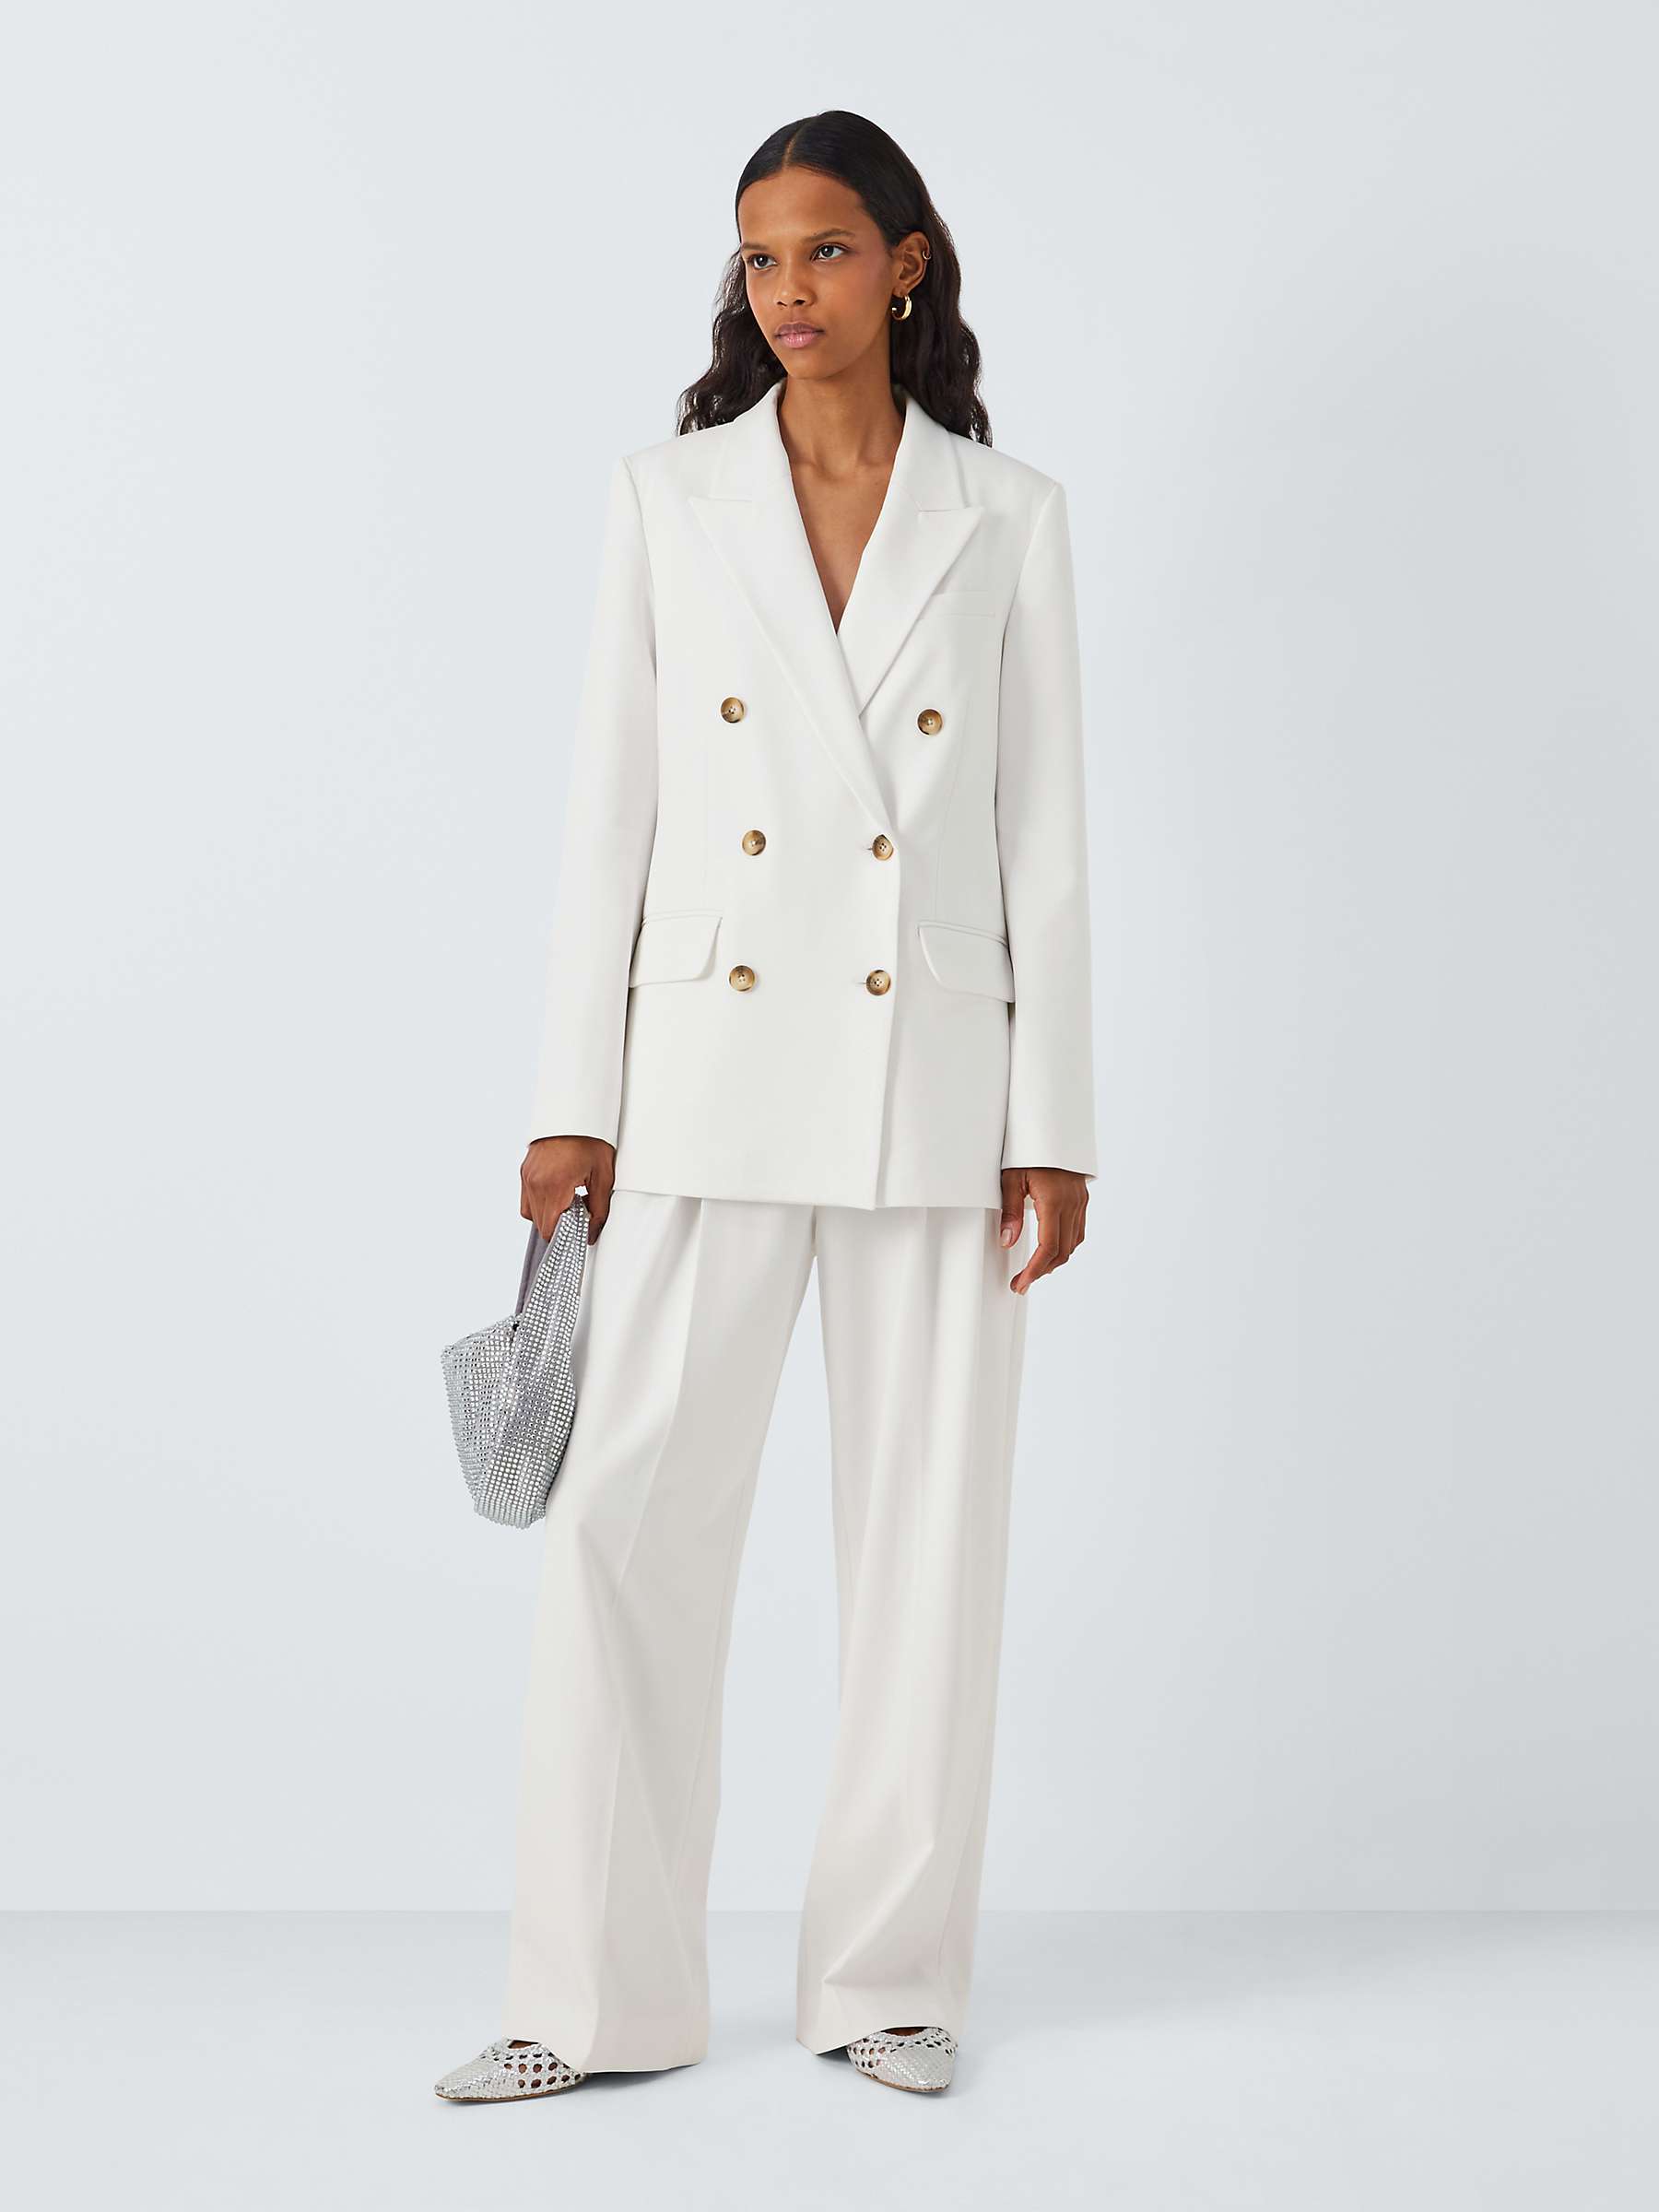 Buy John Lewis Double Breasted Blazer Online at johnlewis.com